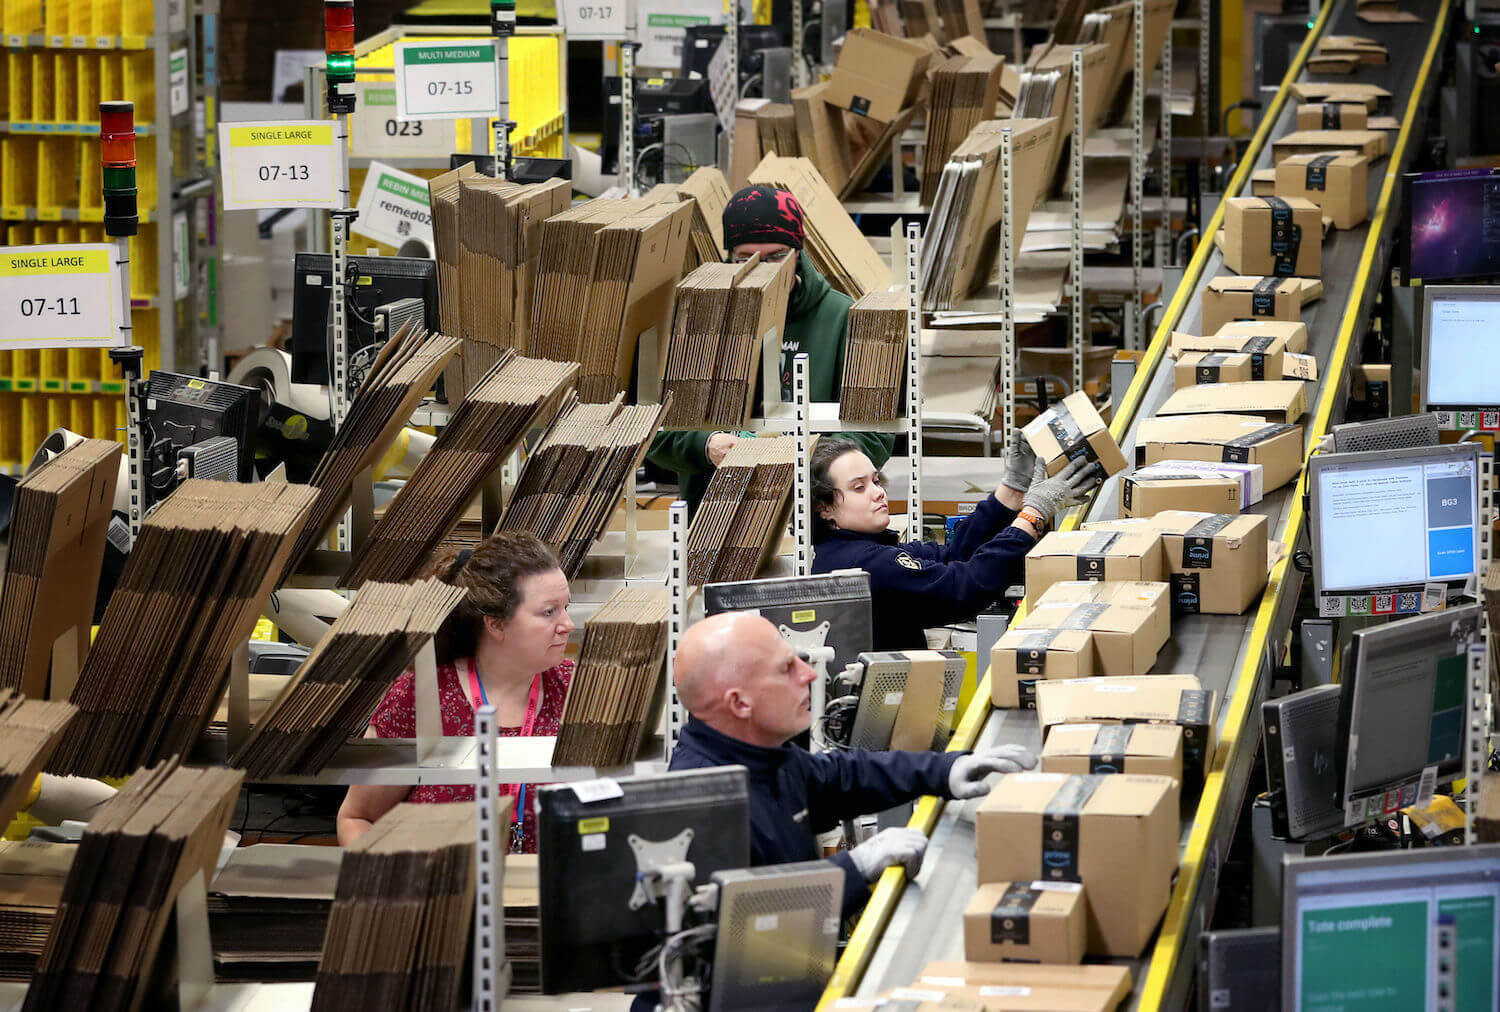 Staff label and package items inside one of the largest Amazon warehouses. January 2021